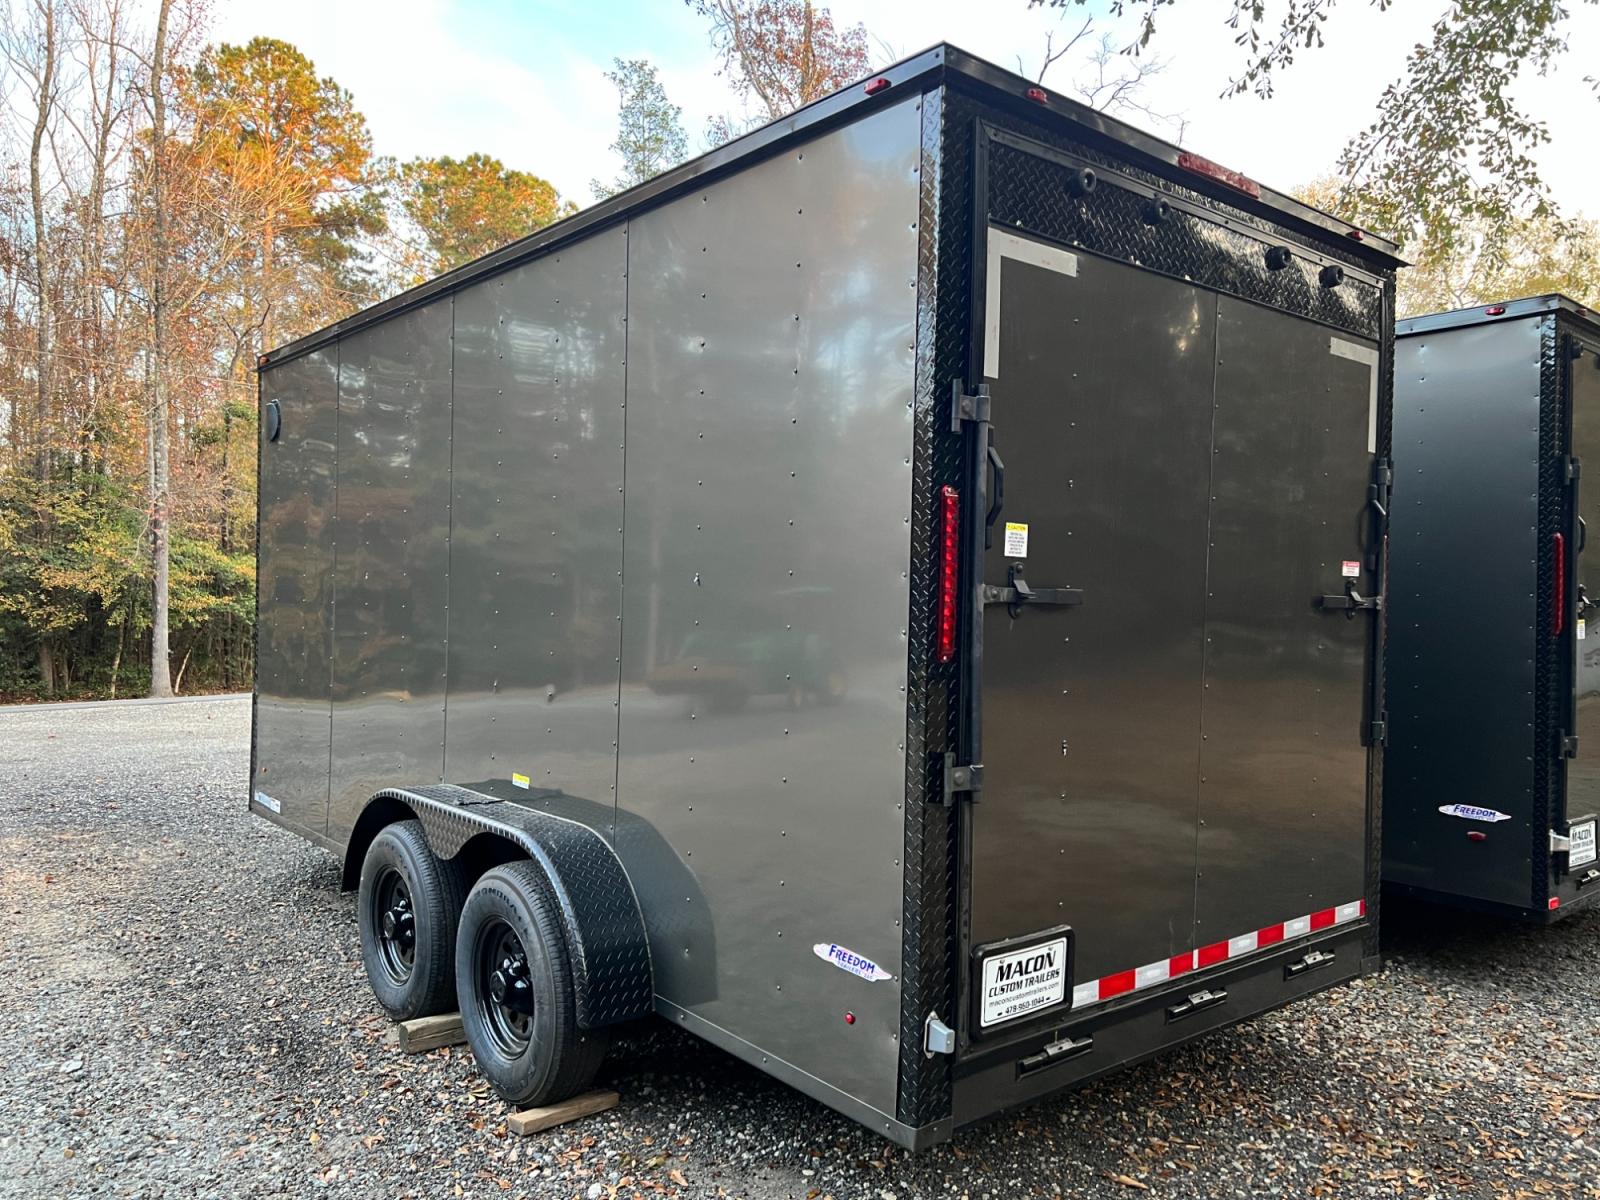 2023 .080 Charcoal Elite Cargo 7ft X 16ft Tandem 5K lb Axles! , located at 1330 Rainey Rd., Macon, 31220, (478) 960-1044, 32.845638, -83.778687 - Brand New 2023 "Top of the Line" Elite Cargo Trailer, Made in South Ga. Awesome 7ft X 16ft Tandem Enclosed Cycle Hauler & Cargo Trailer! Taller Inside Height is 7ft 6" Tall Inside & the Ramp Door Clearance is 7ft, at the Back Door! Up-Graded Larger 5k lb Dexter Brake Axles! Larger 225/75/15" 10 - Photo #3